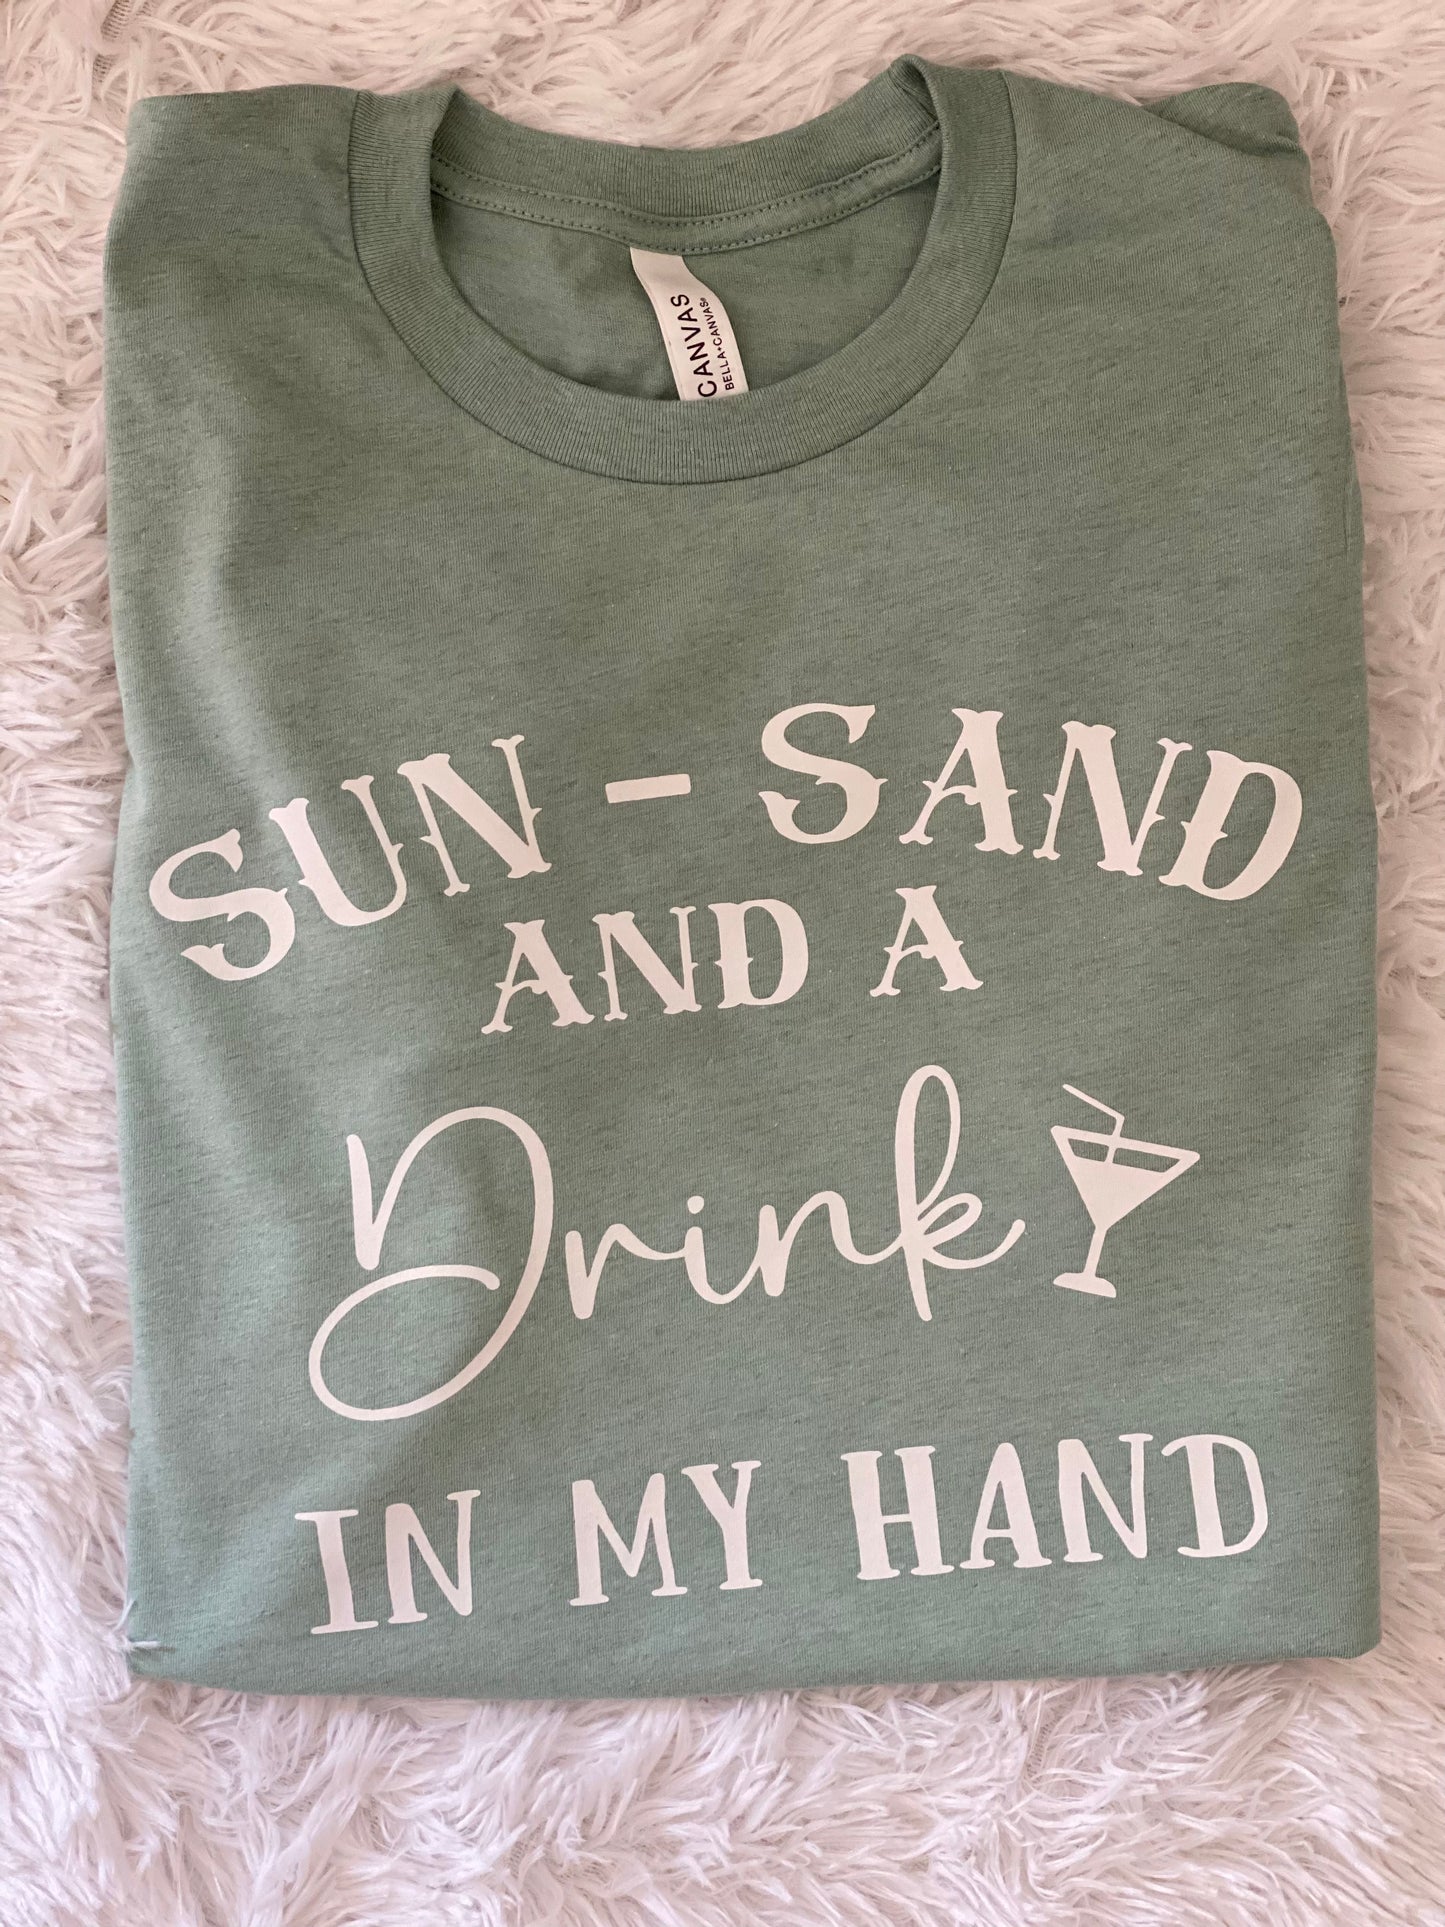 Pre-Order Sun - Sand and a Drink in my Hand Graphic Tee